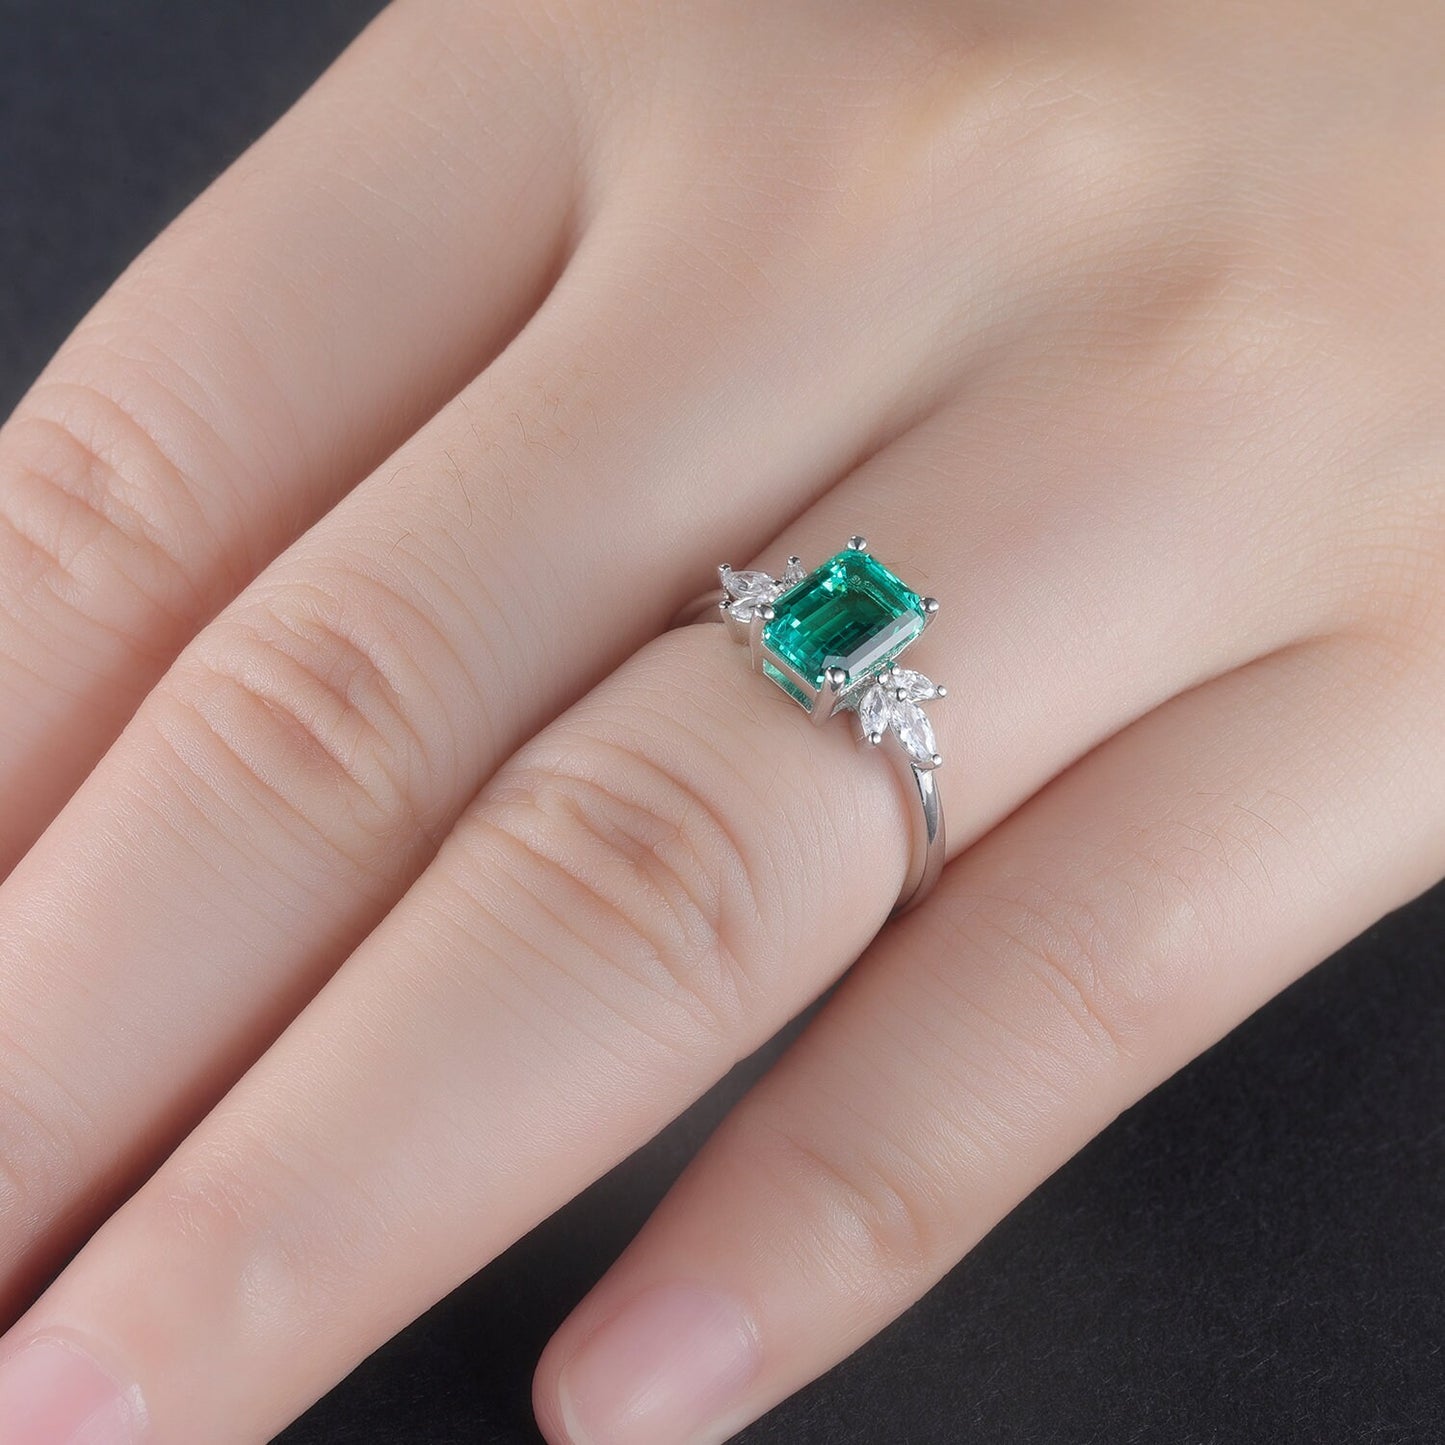 Emerald ring women moissanite engagement ring white gold art deco wedding band floral vintage bridal jewelry May birthstone anniversary gift